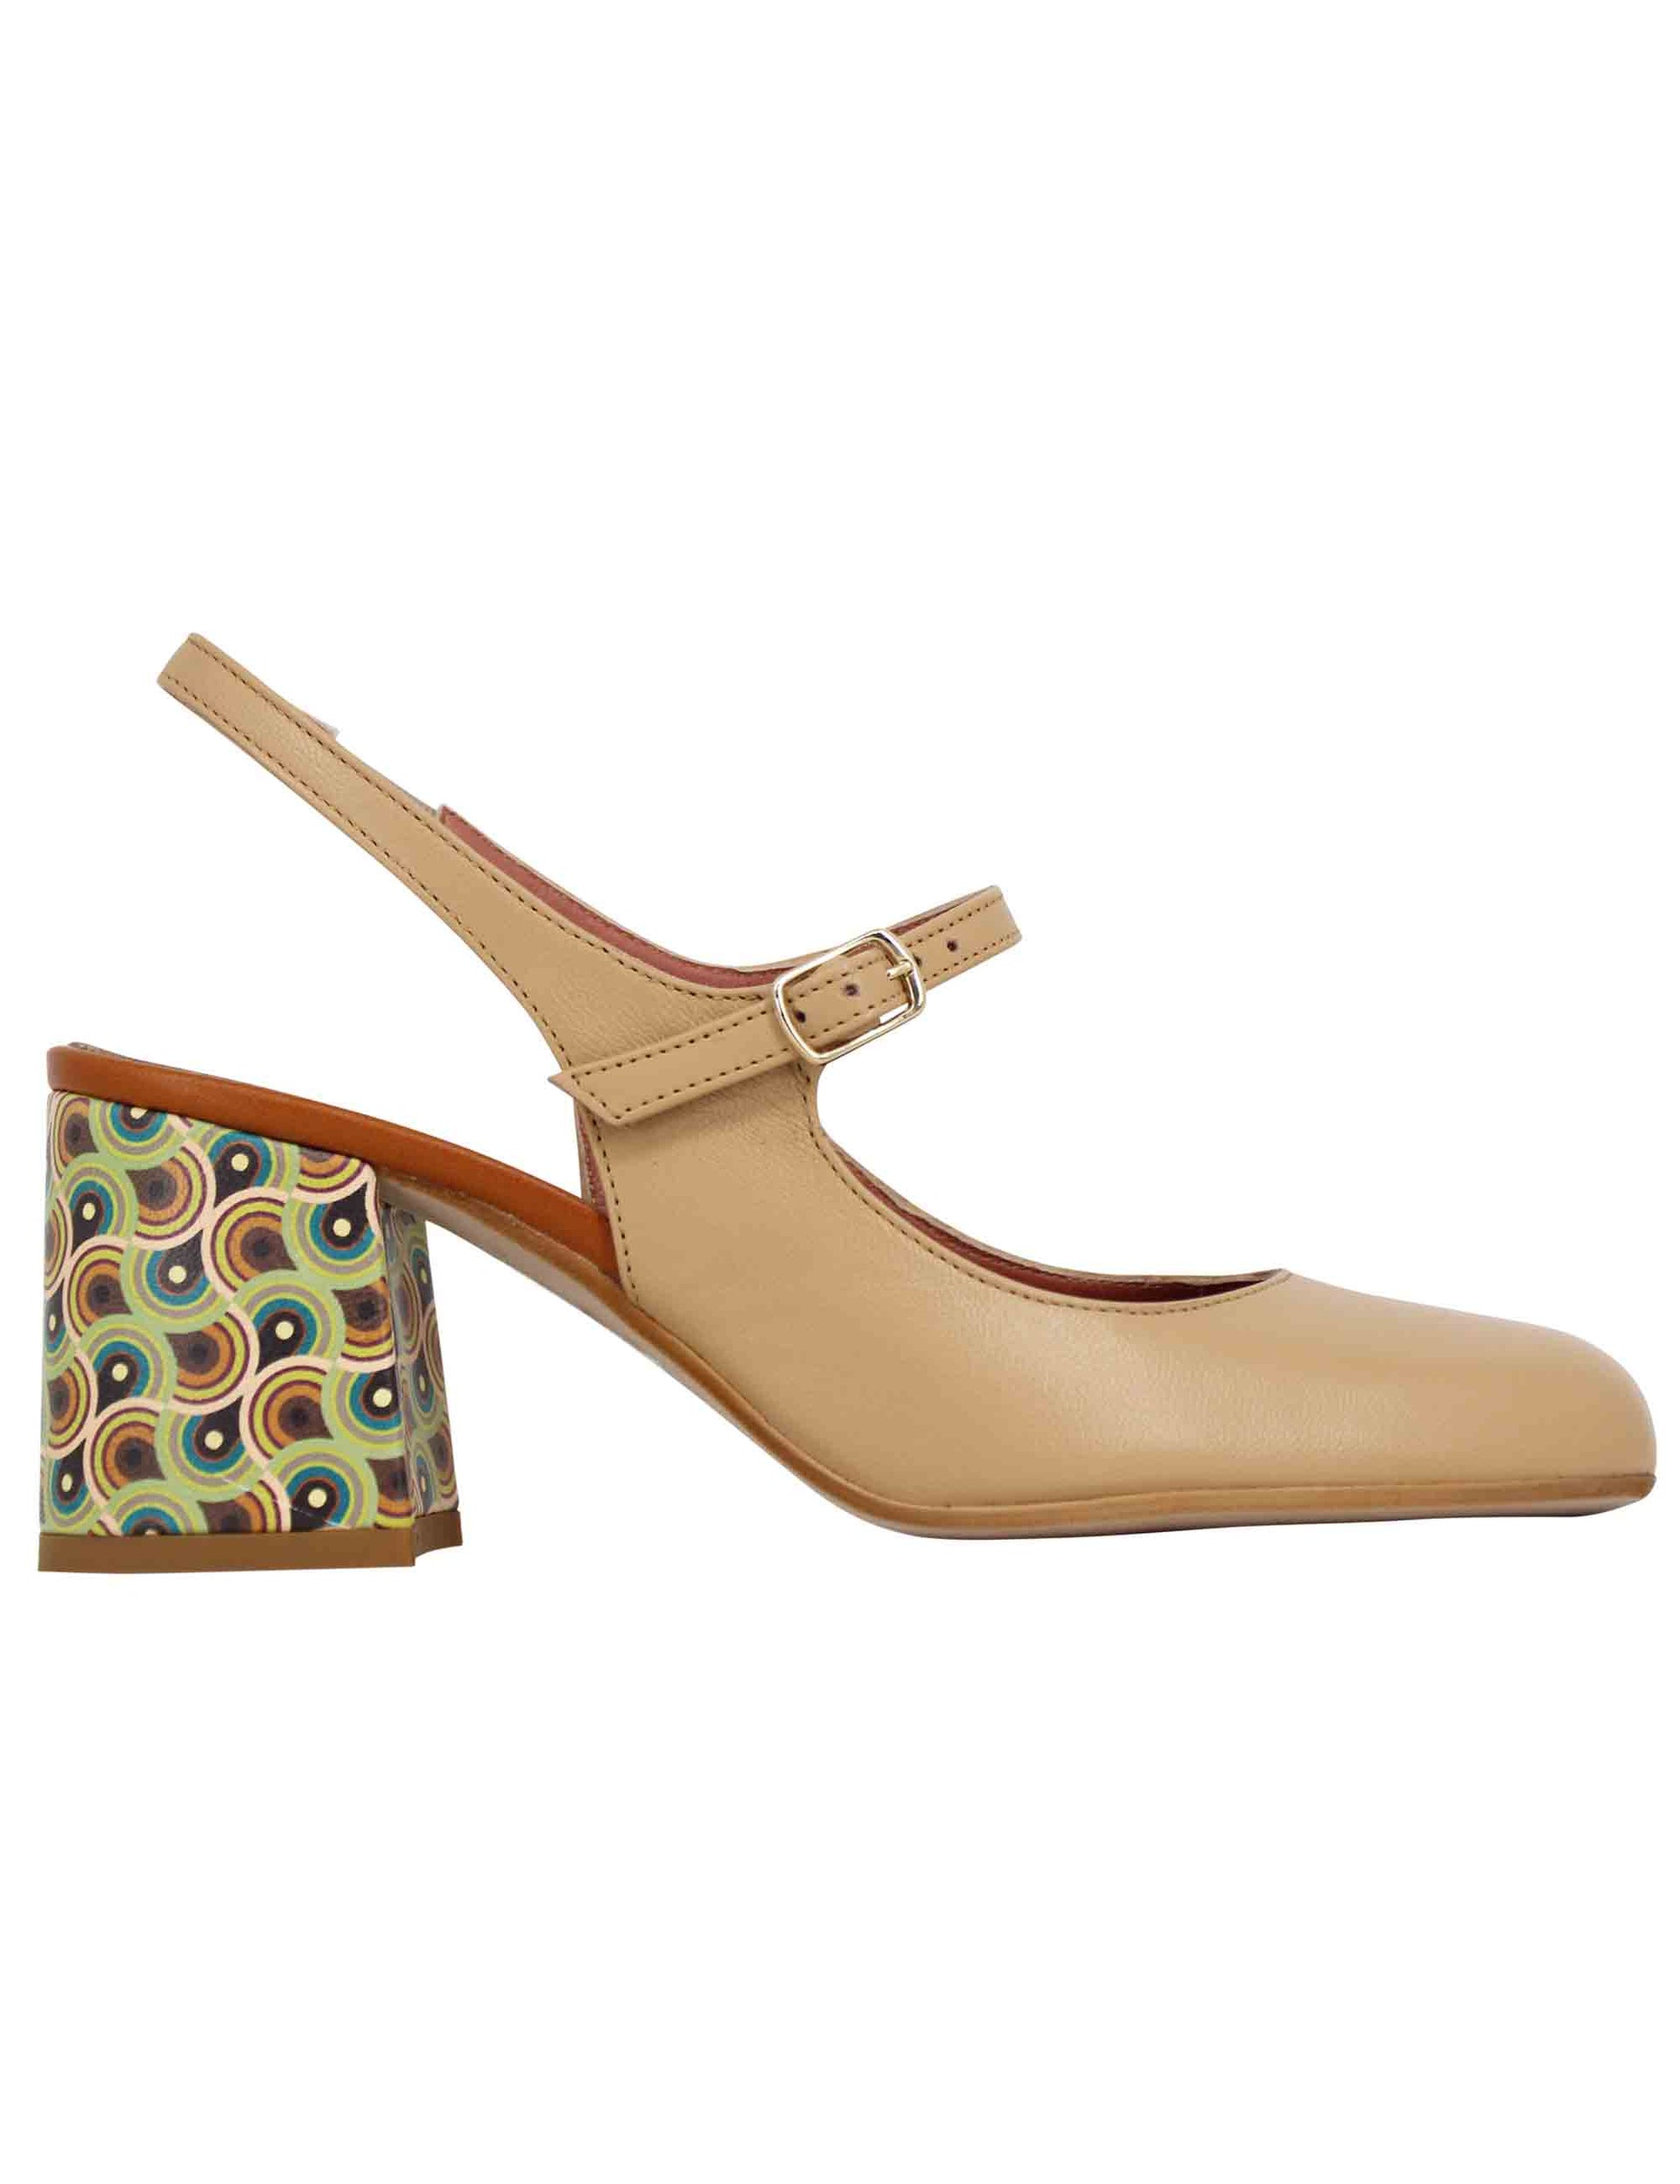 Women's sligback pumps in beige leather with round toe